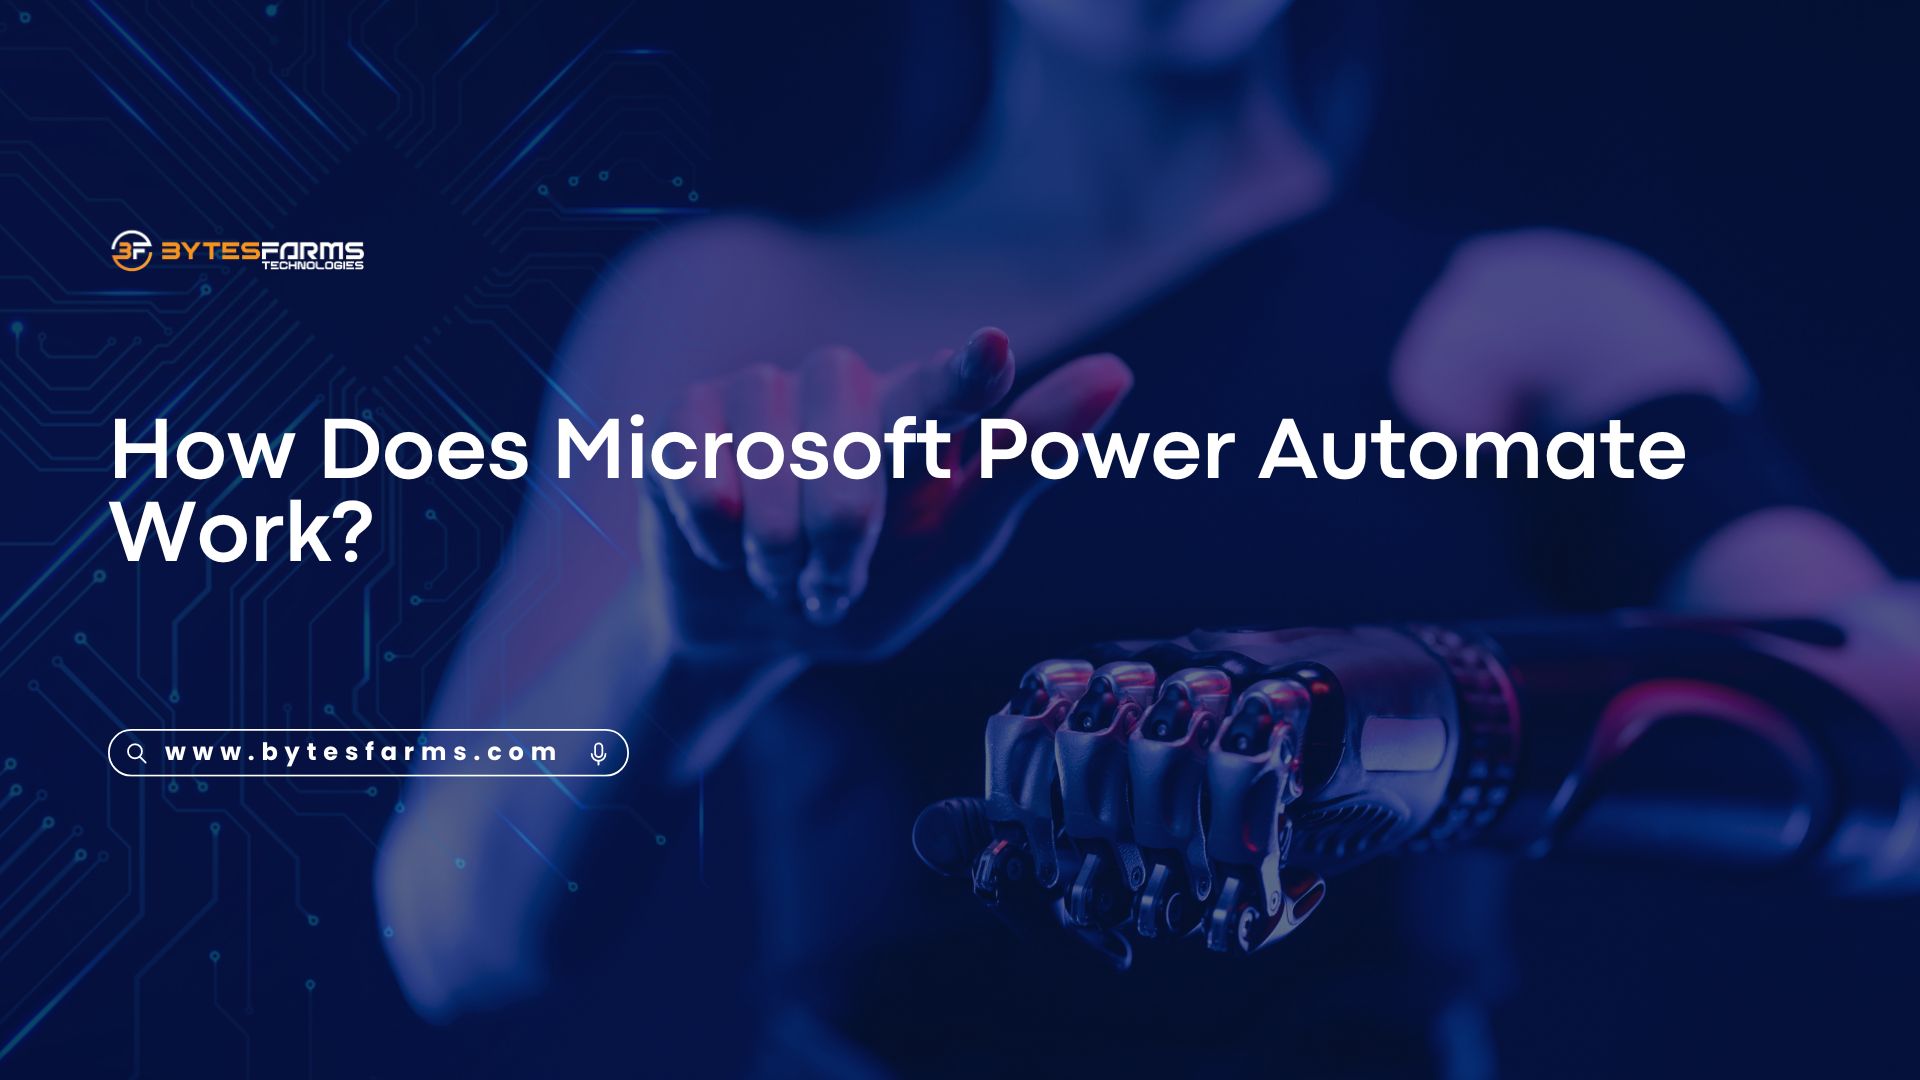 How Does Microsoft Power Automate Work